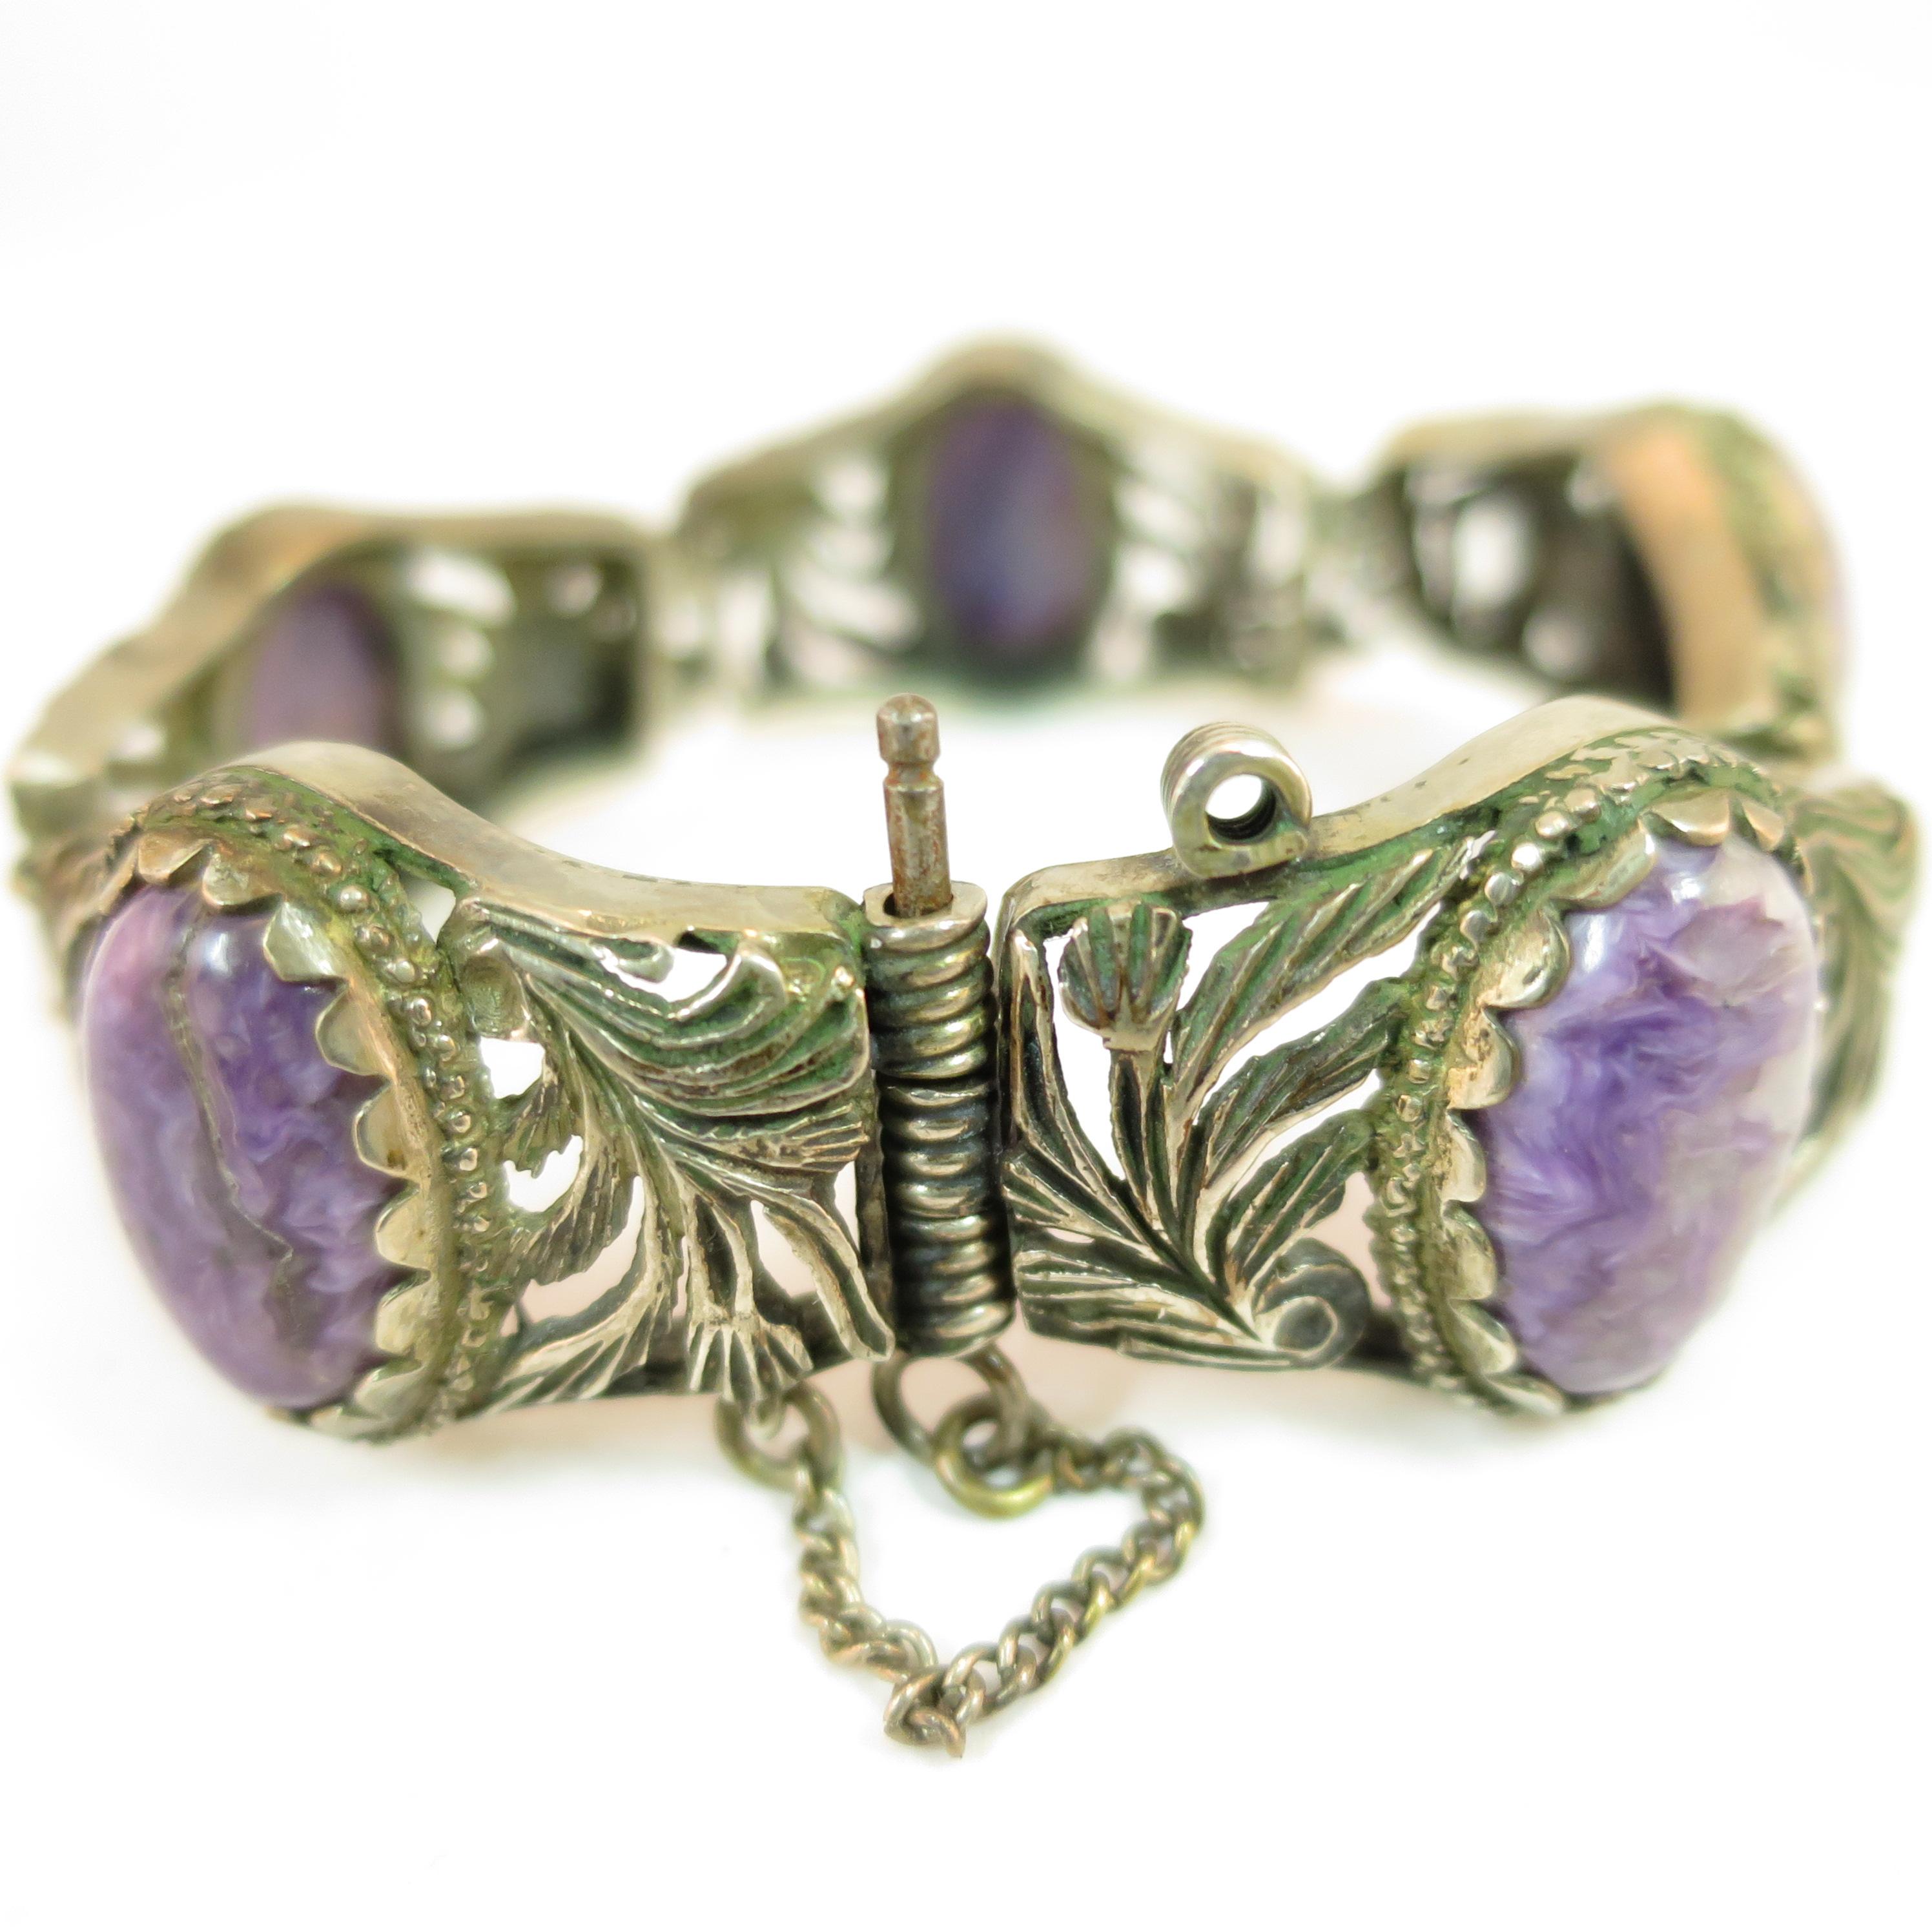 Victorian Chinese Export Silver & Amethyst Link Bracelet, Circa 1860s For Sale 6